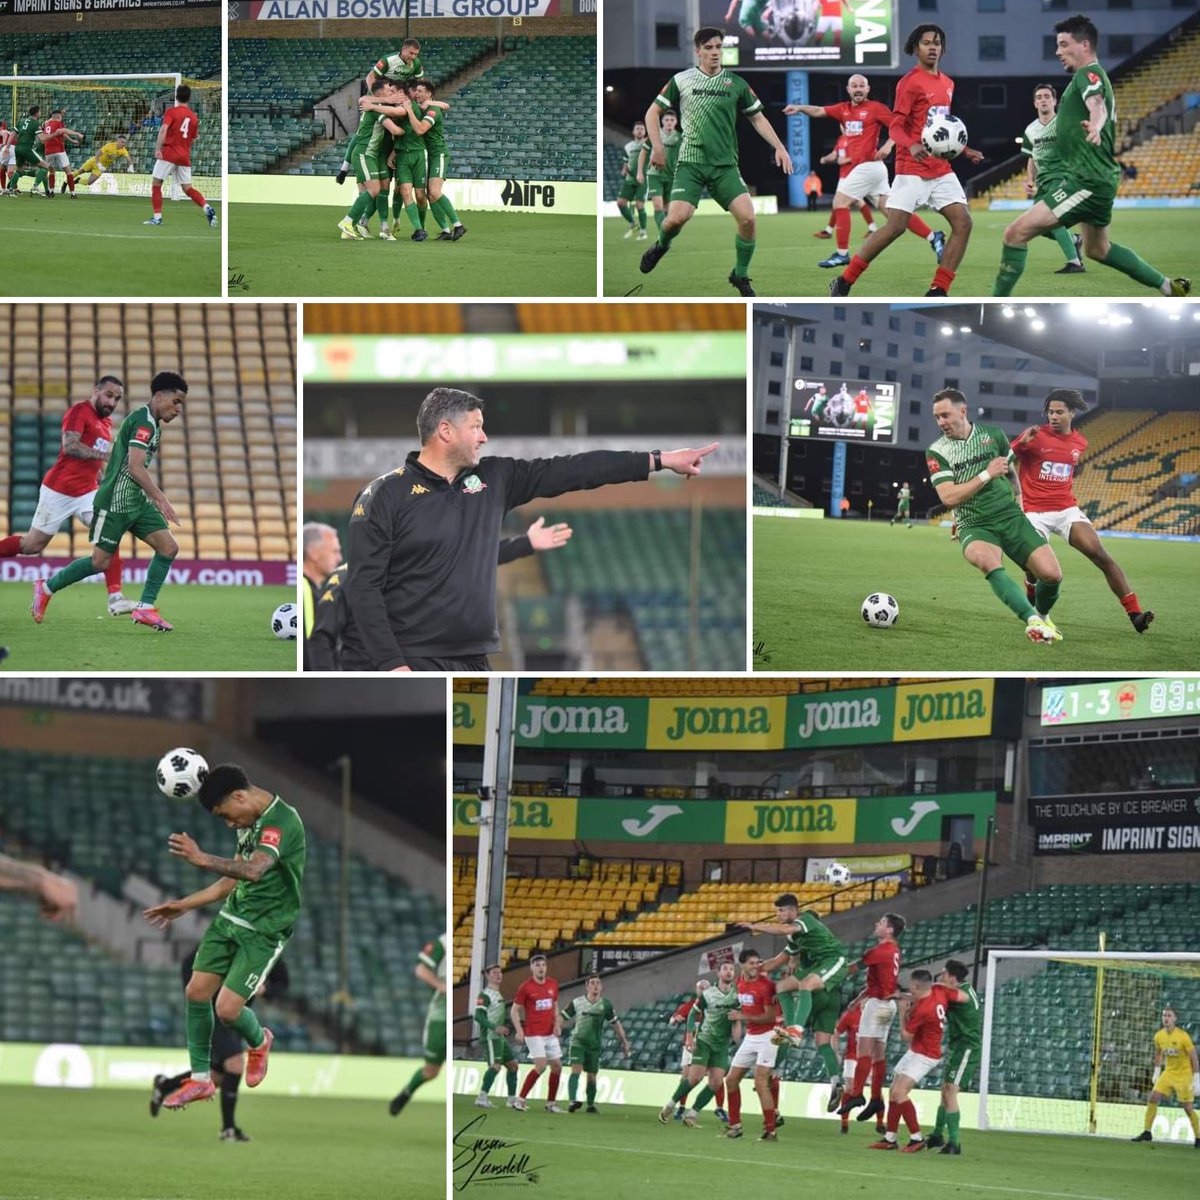 Few shots from 2nd half @NorfolkHire Senior Cup Final @gorlestonfc v @Downham_TownFC 

More photos 📸 can be found on our Facebook page facebook.com/profile.php?id…

@NorfolkCountyFA 
#football #CountyCup #countycupfinal #teamphotographer  #highlight #highlight2024season